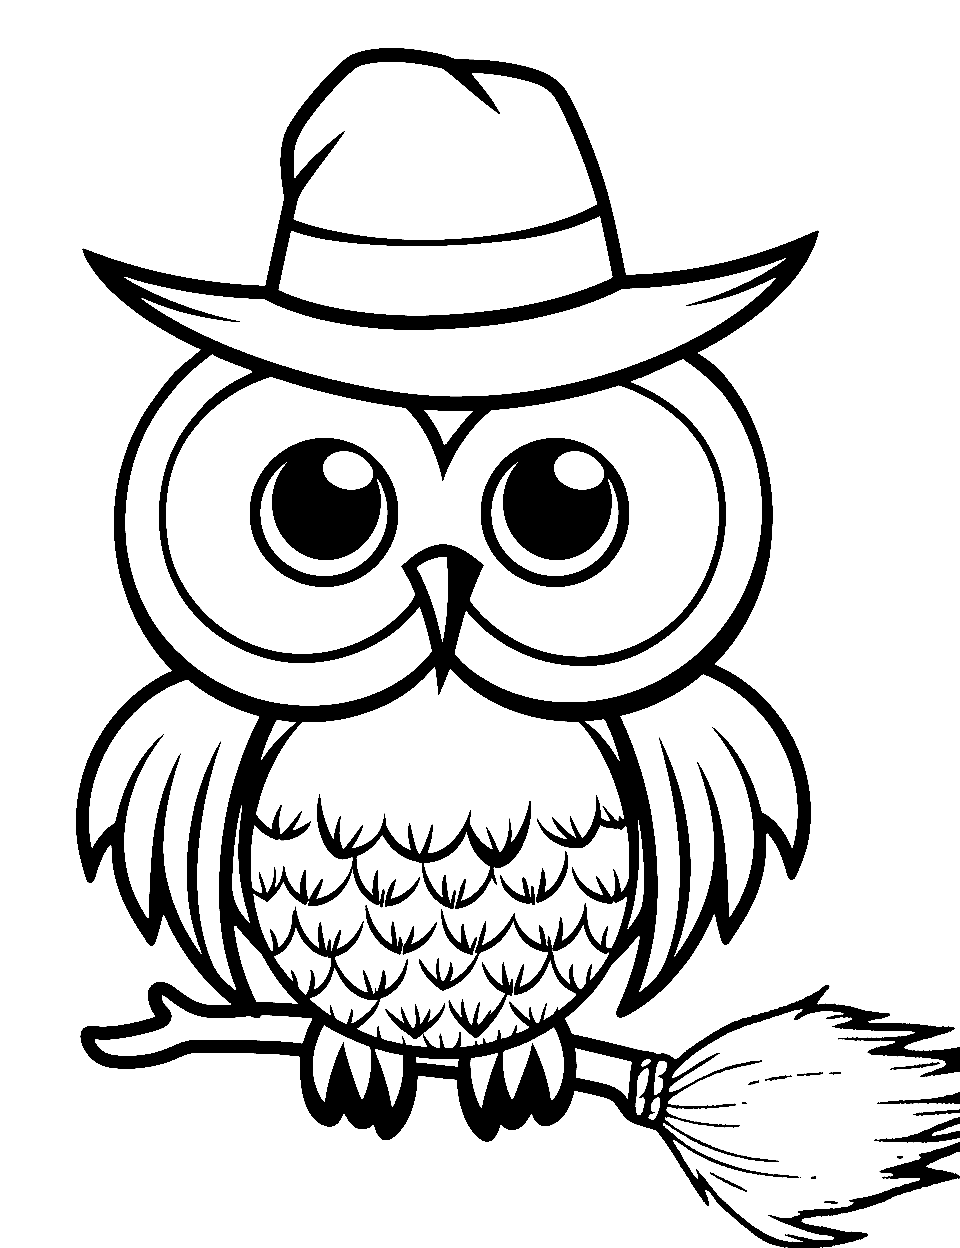 Owl coloring pages free printable sheets